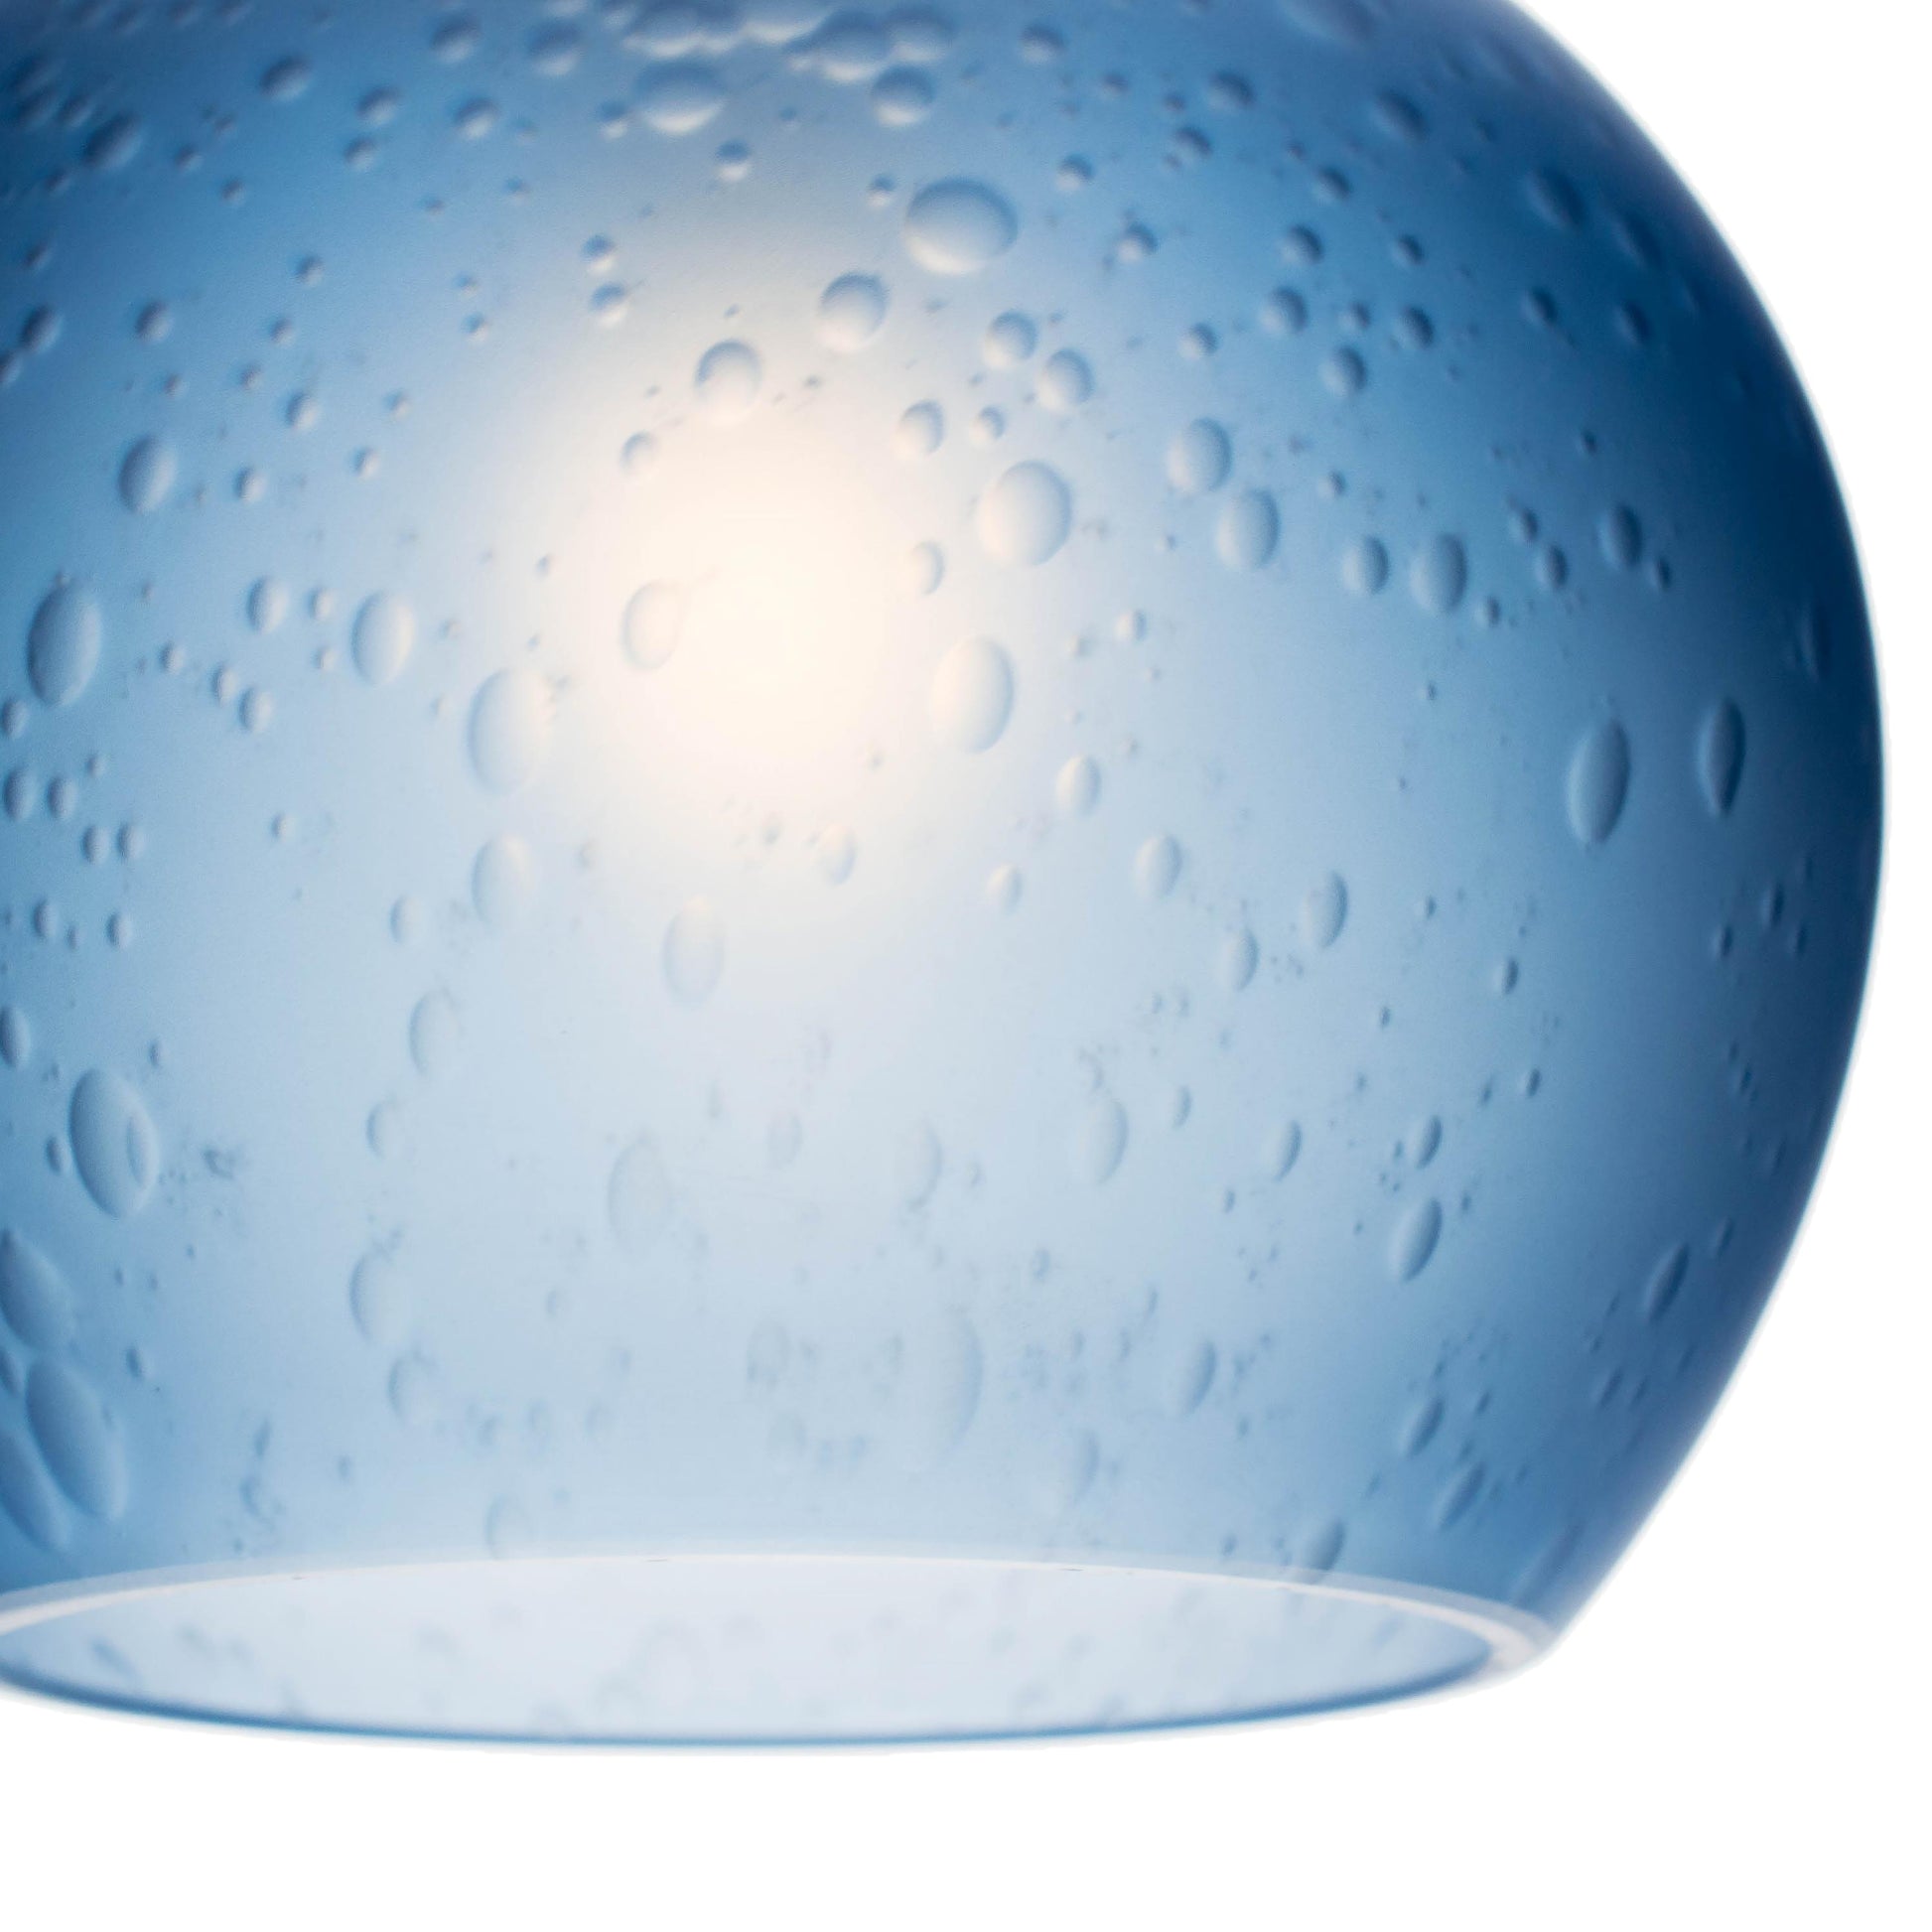 768 Celestial: Single Pendant Light-Glass-Bicycle Glass Co-Steel Blue-Bicycle Glass Co